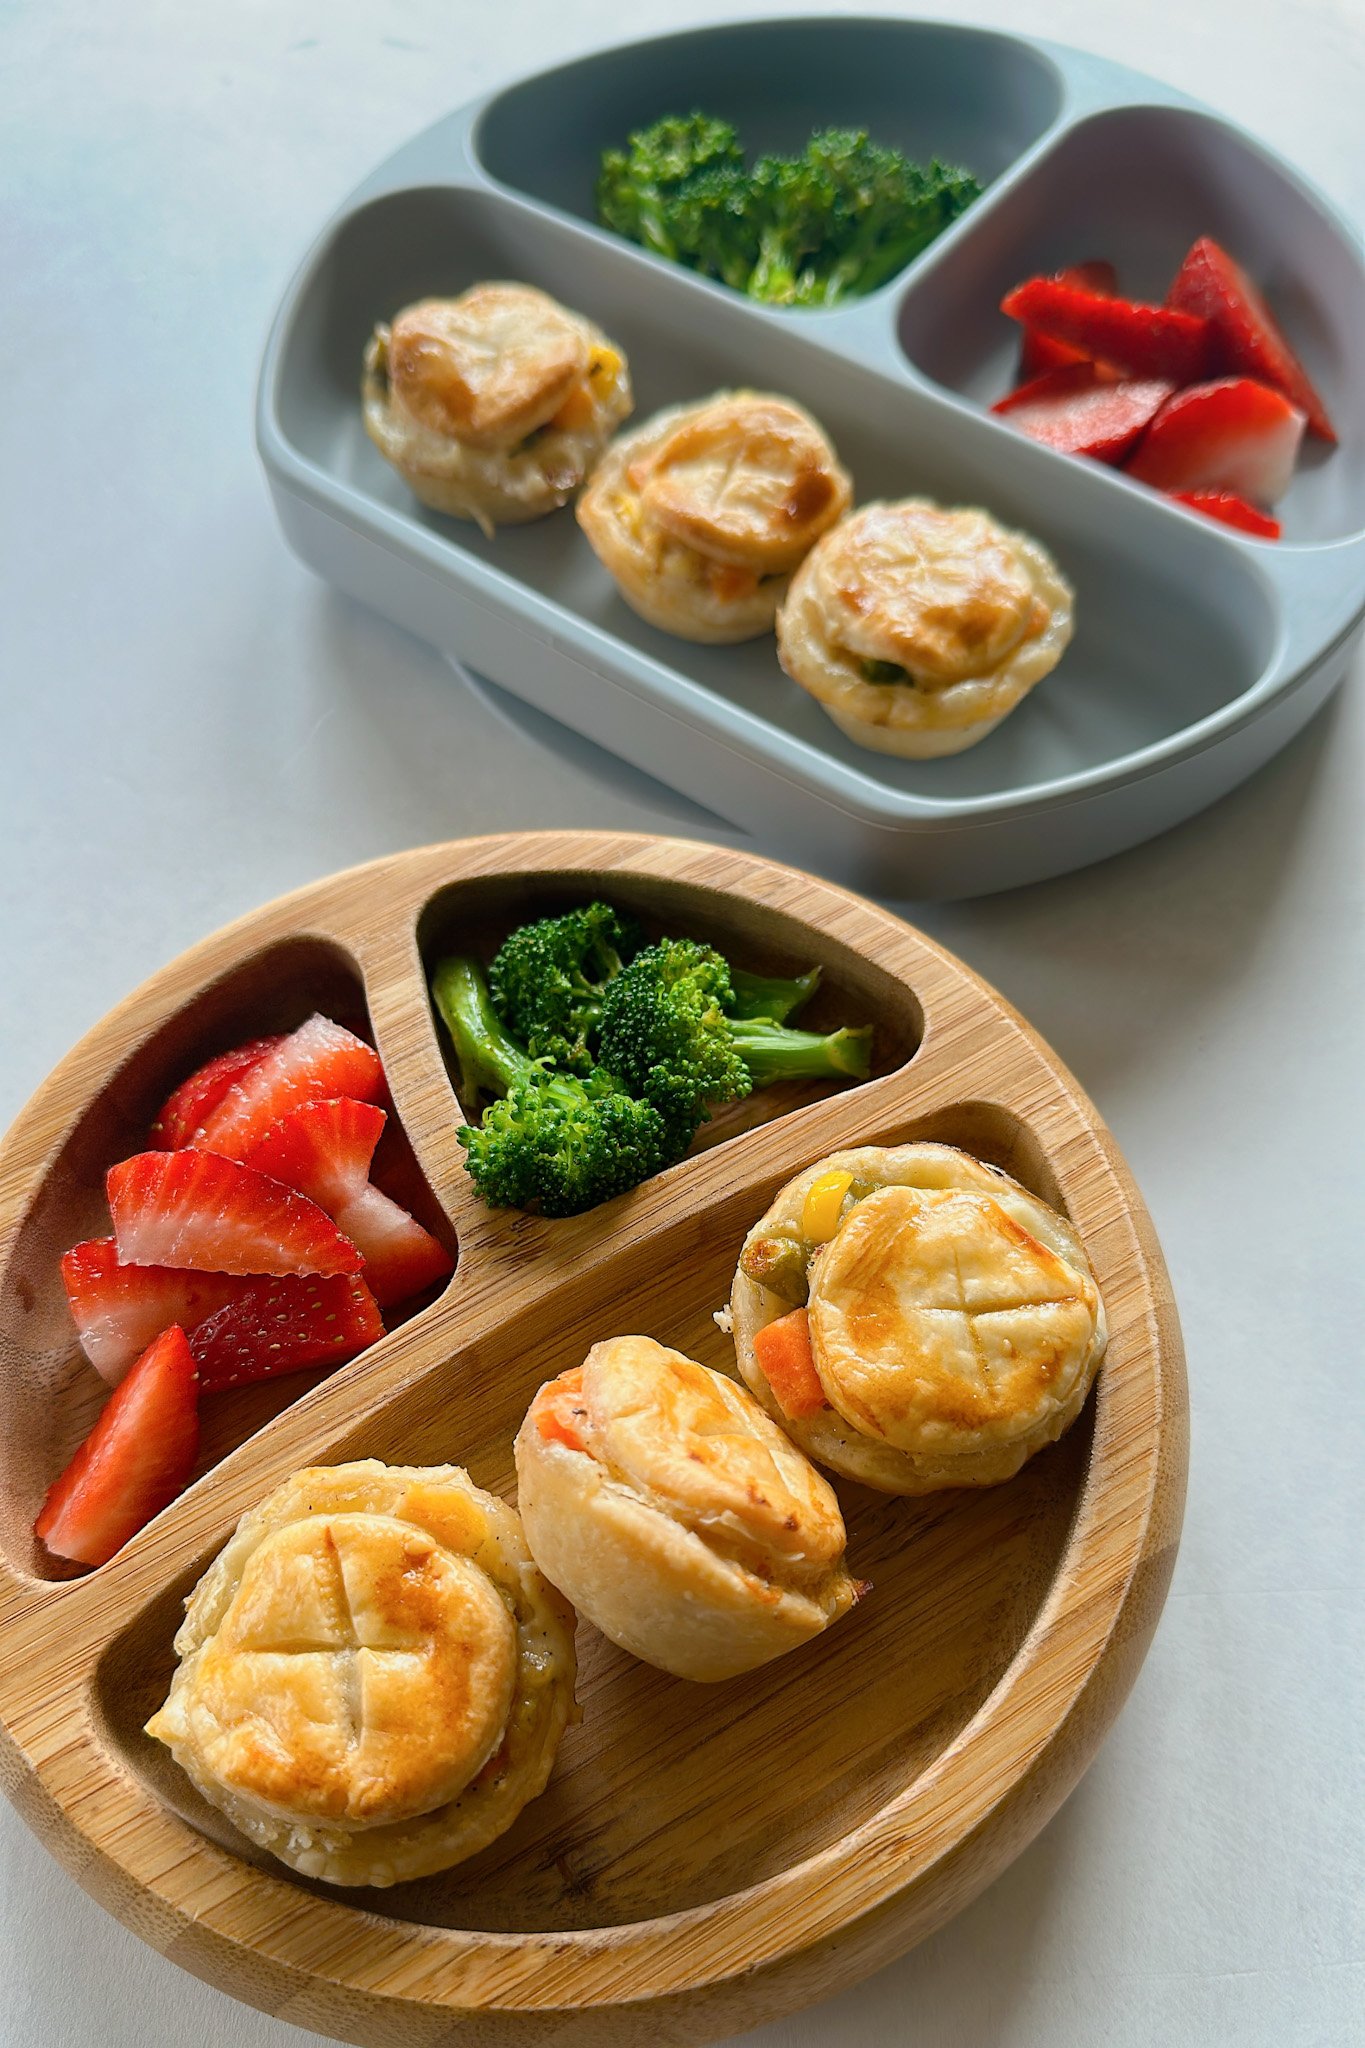 Mini chicken pot pies served with strawberries and broccoli.